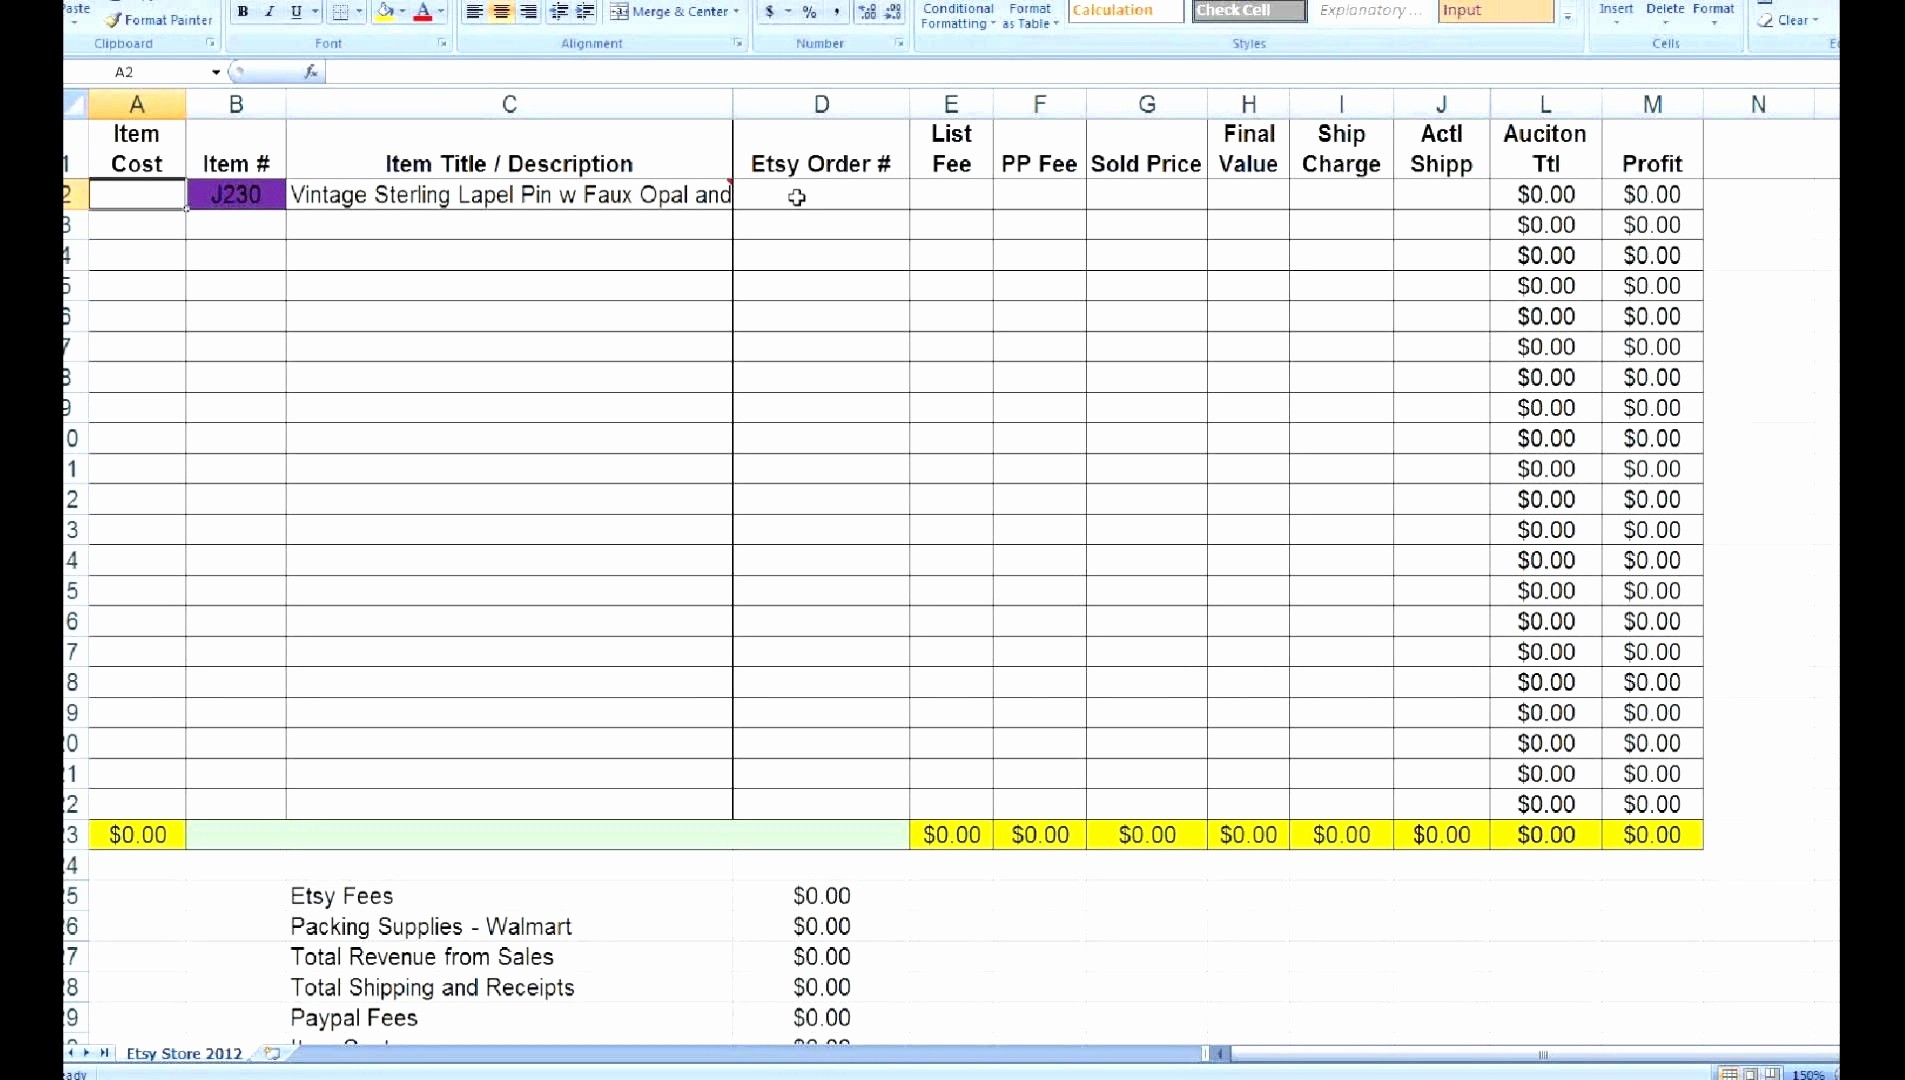 Biggest Loser Weight Loss Chart Template Luxury Document Tracking Sheet